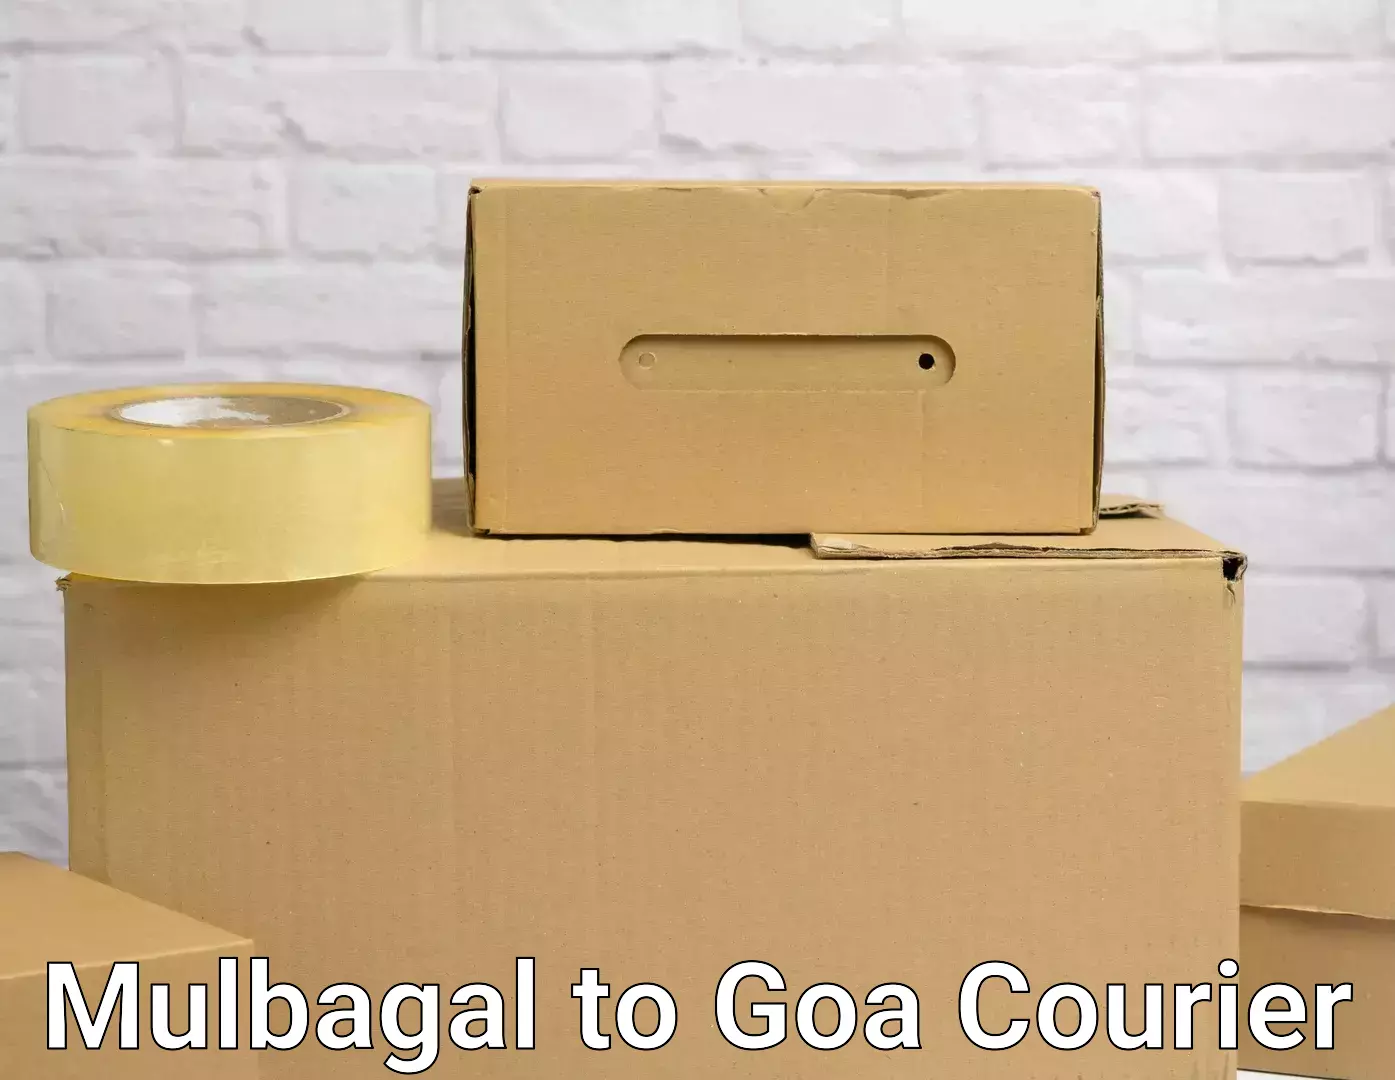 Full-service movers Mulbagal to Goa